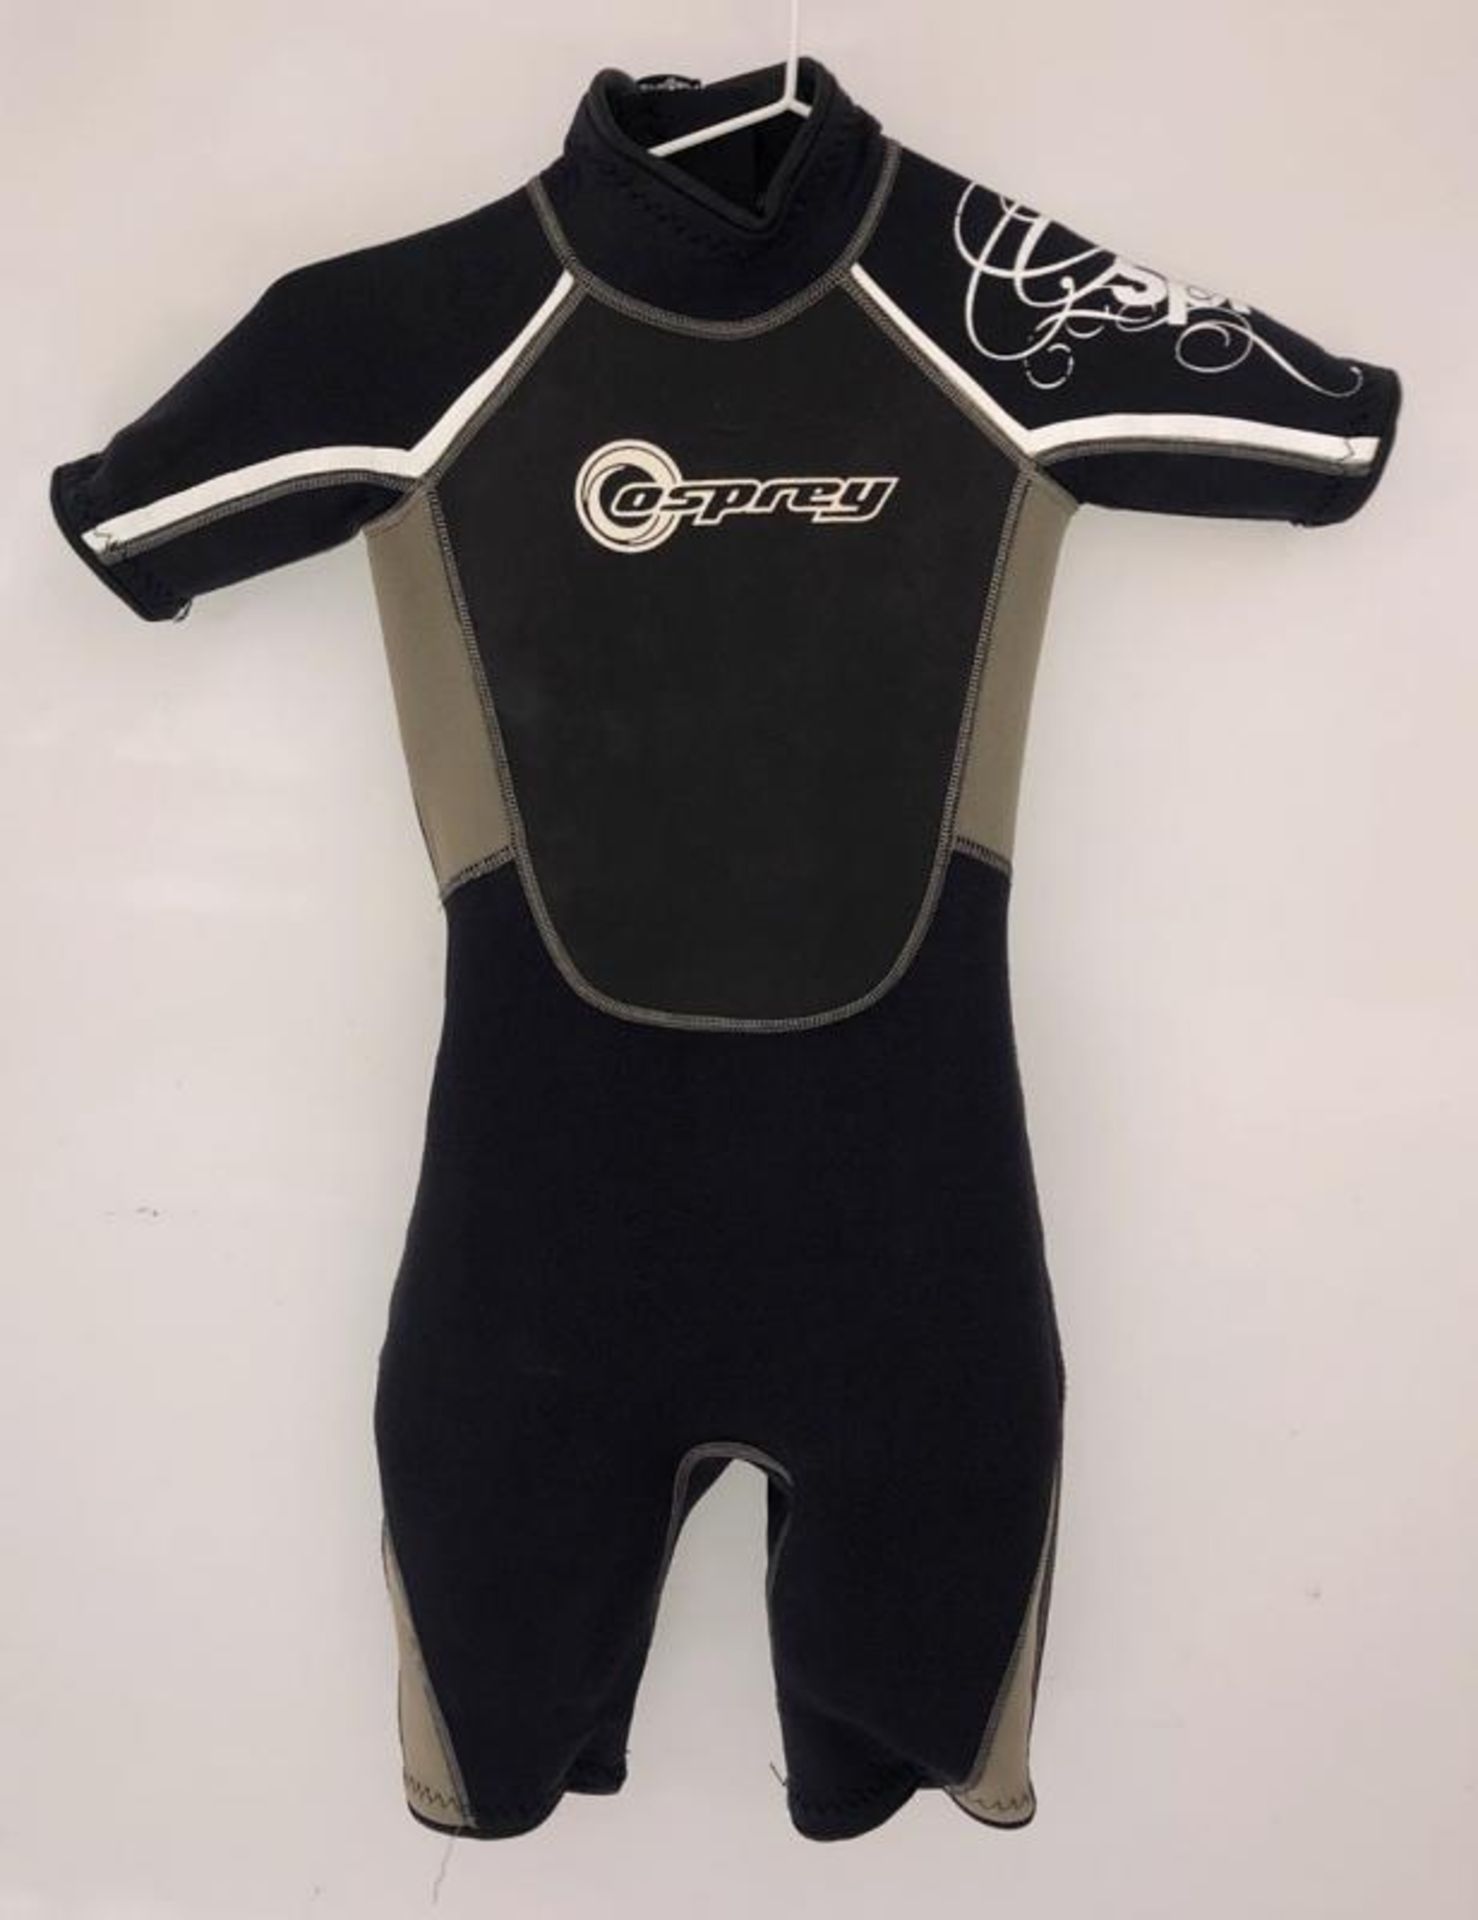 3 x Junior Wetsuit's - Ref: NS349, NS351, NS347 - CL349 - Location: Altrincham WA14 - Used In Good C - Image 10 of 10